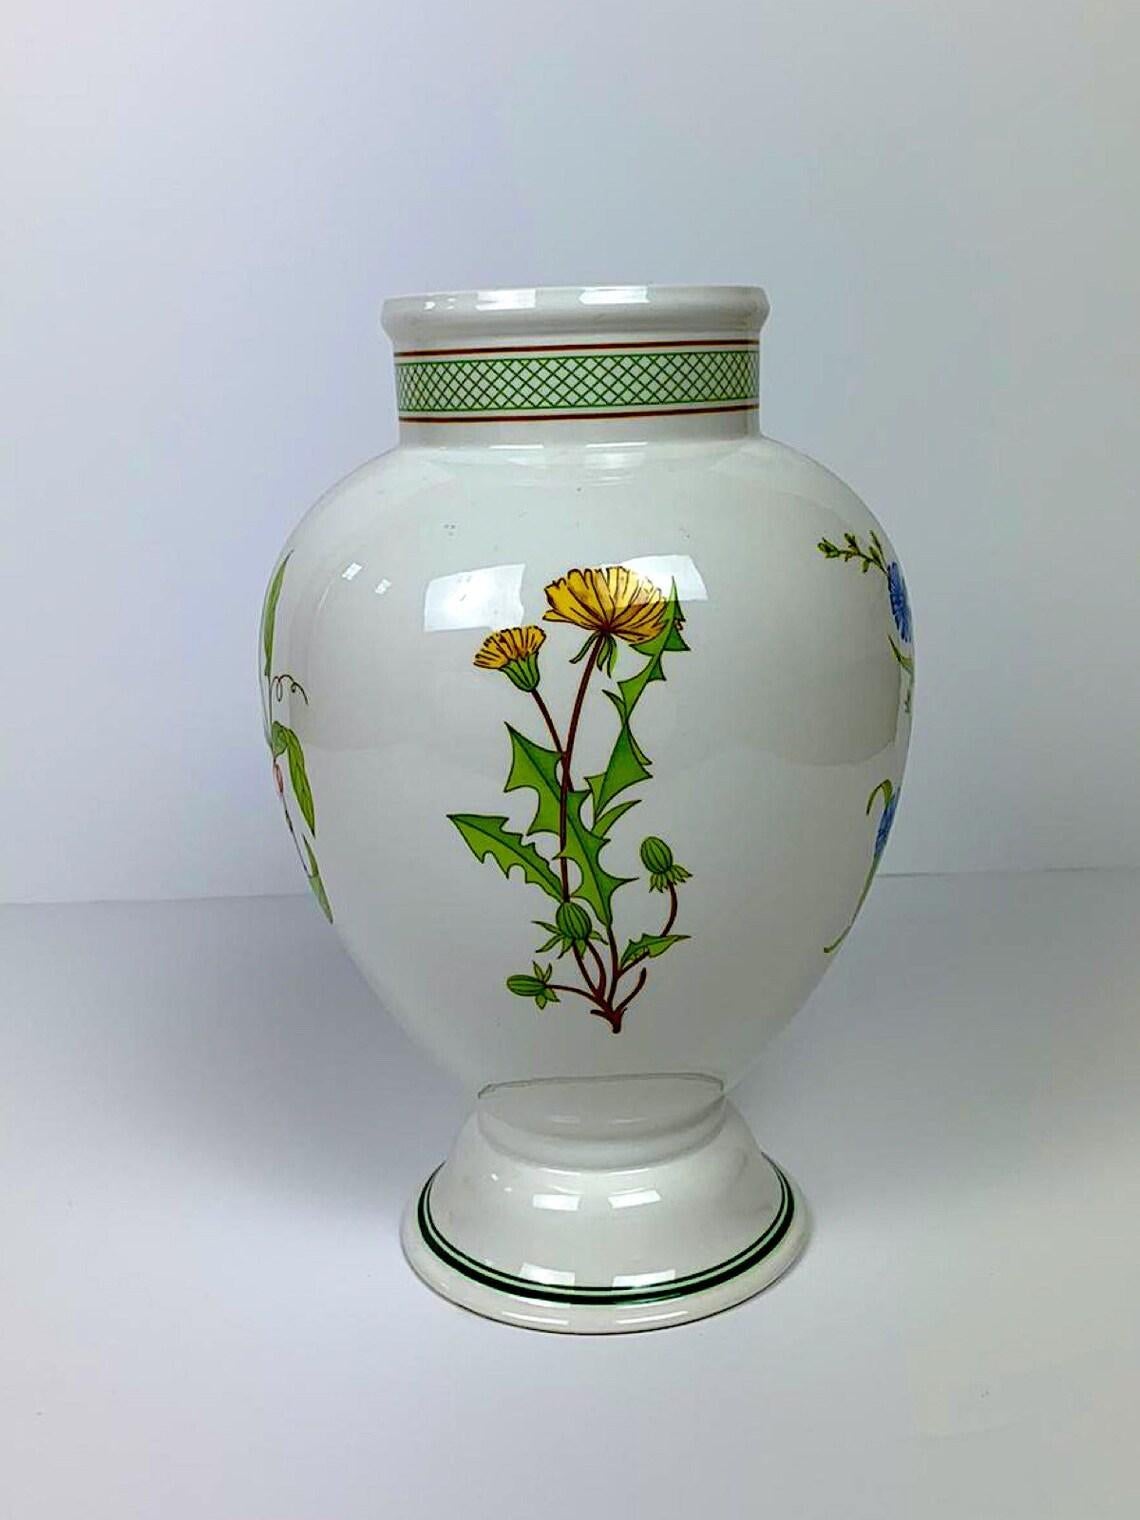 Exclusive Floral Vase from Villeroy&Boch.

You will never meet such a vase in an official store because it was discontinued.

Villeroy & Boch vintage vase will appeal to everyone.

Absolute quality and faithfulness to the traditions of